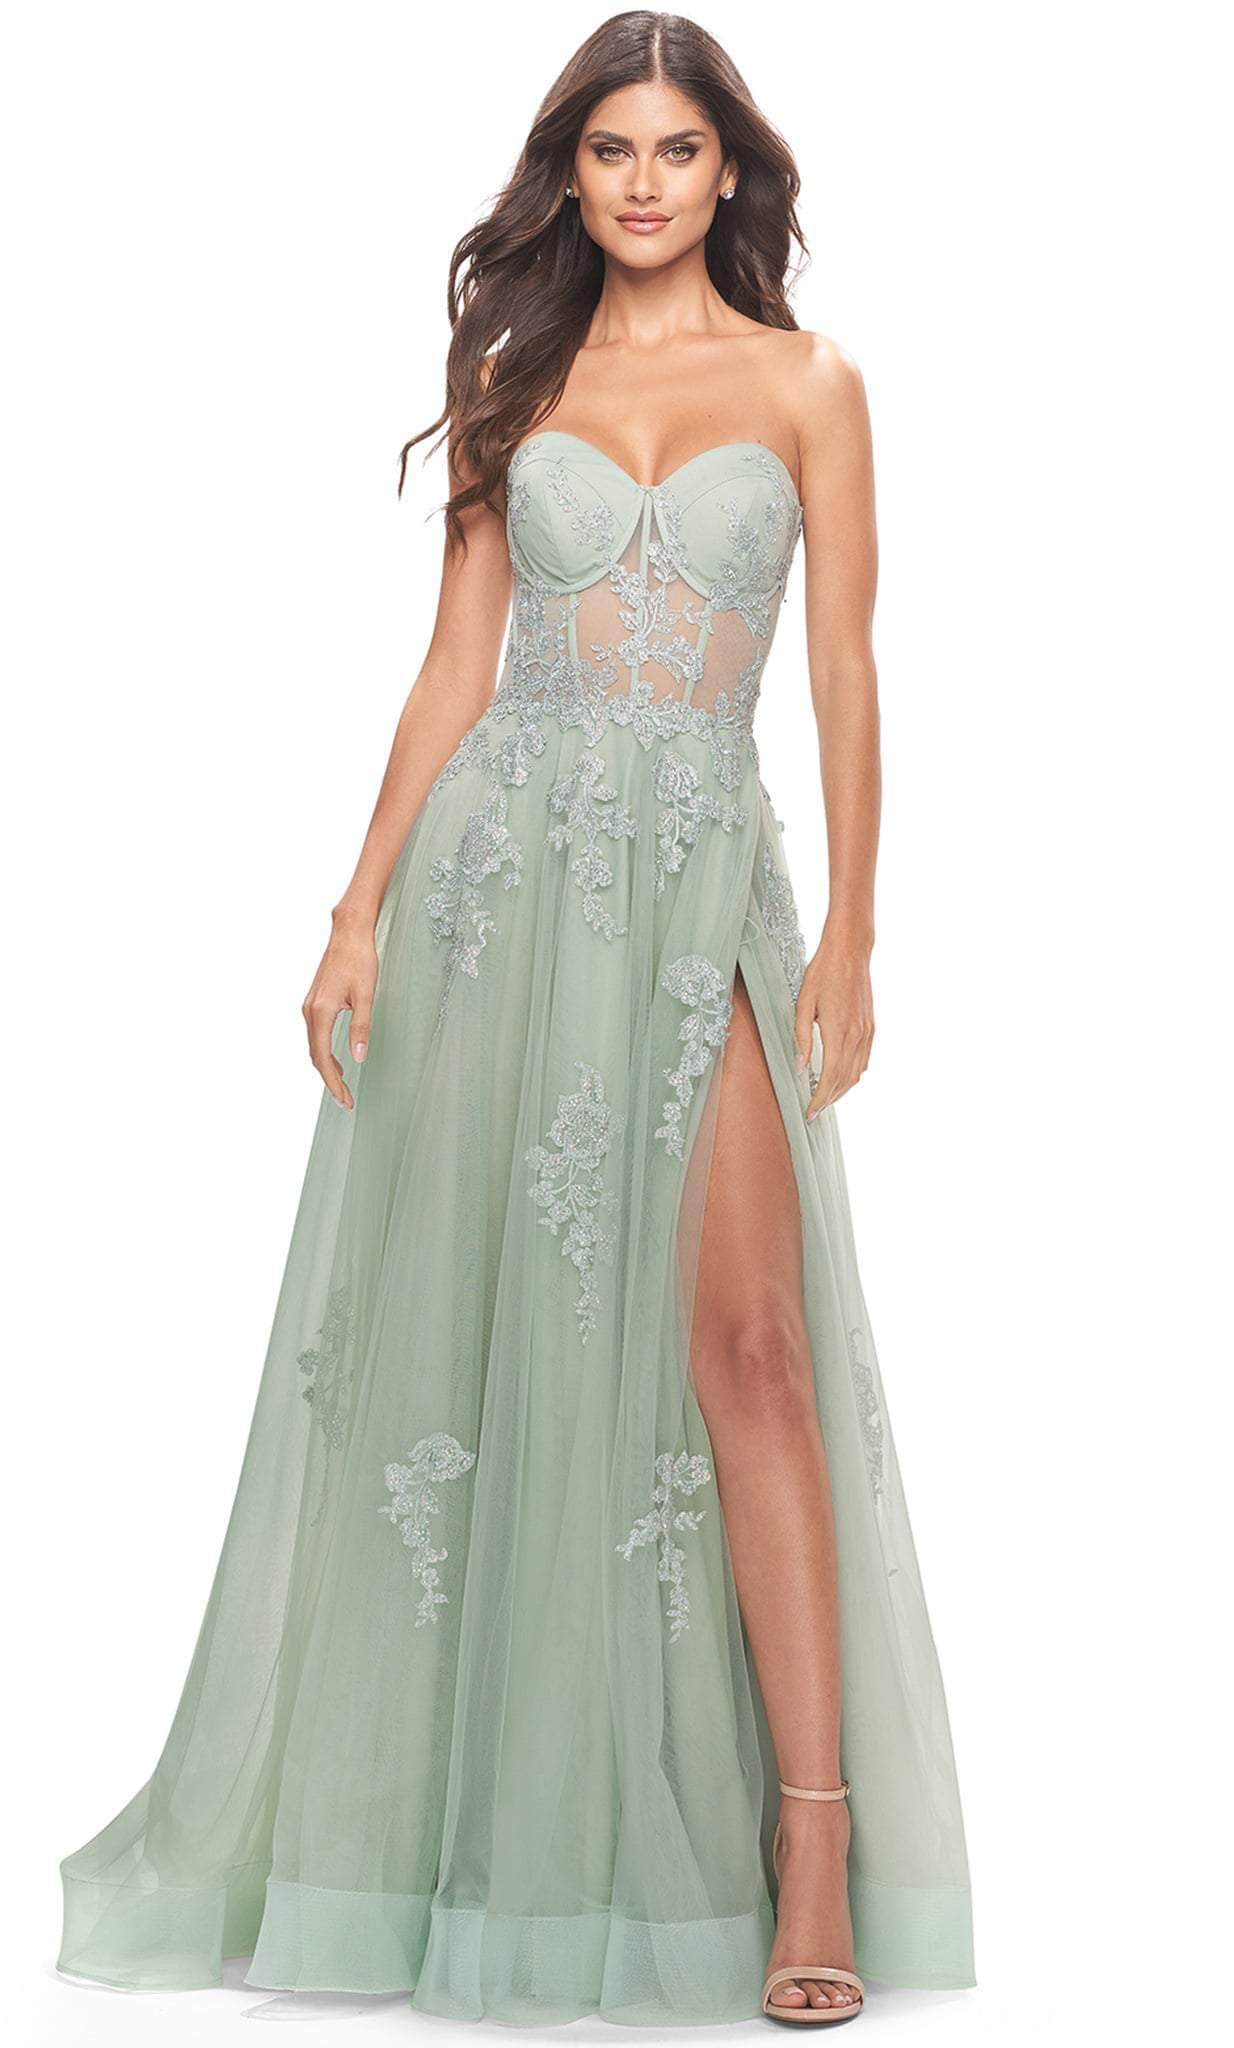 Image of La Femme 31577 - Tulle A-line Strapless Gown